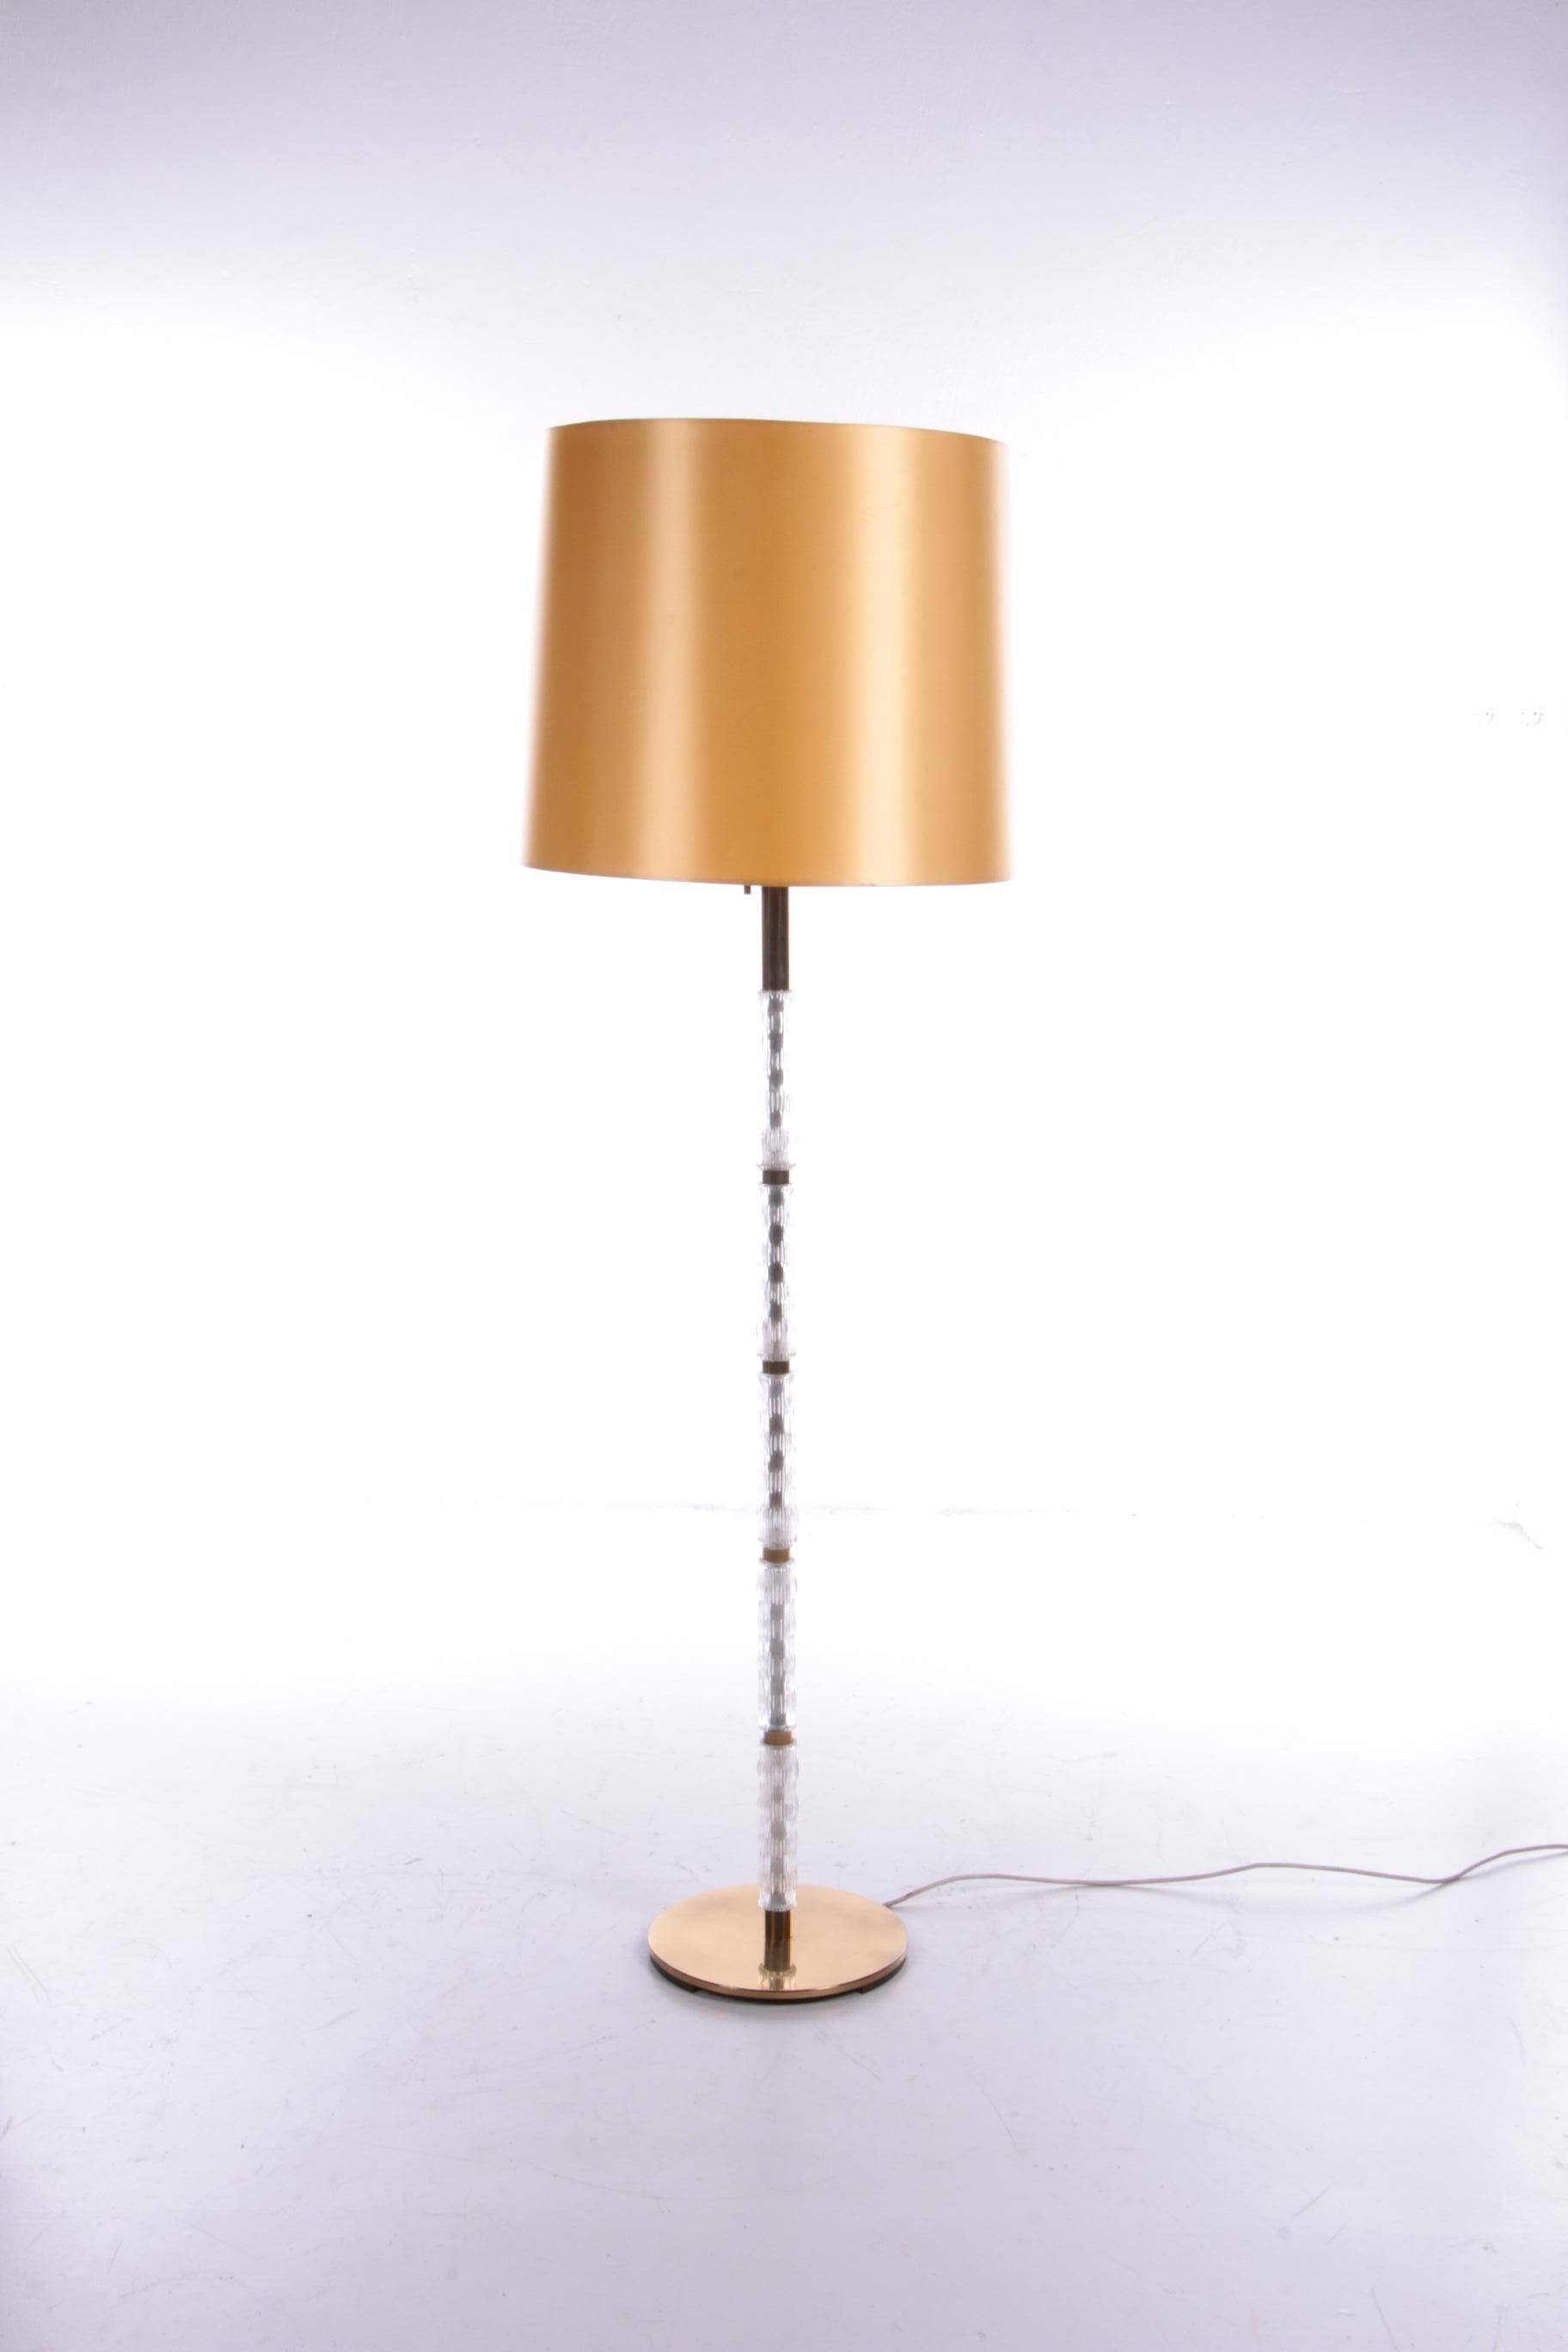 Floor lamp with glass tubes and brass details, 1960s

This is a beautiful glass base with brass details.Beautiful large and also very chic vintage floor lamp. Hollywood Regency Style.Made in brass and glass with gold cap.

This gives a nice